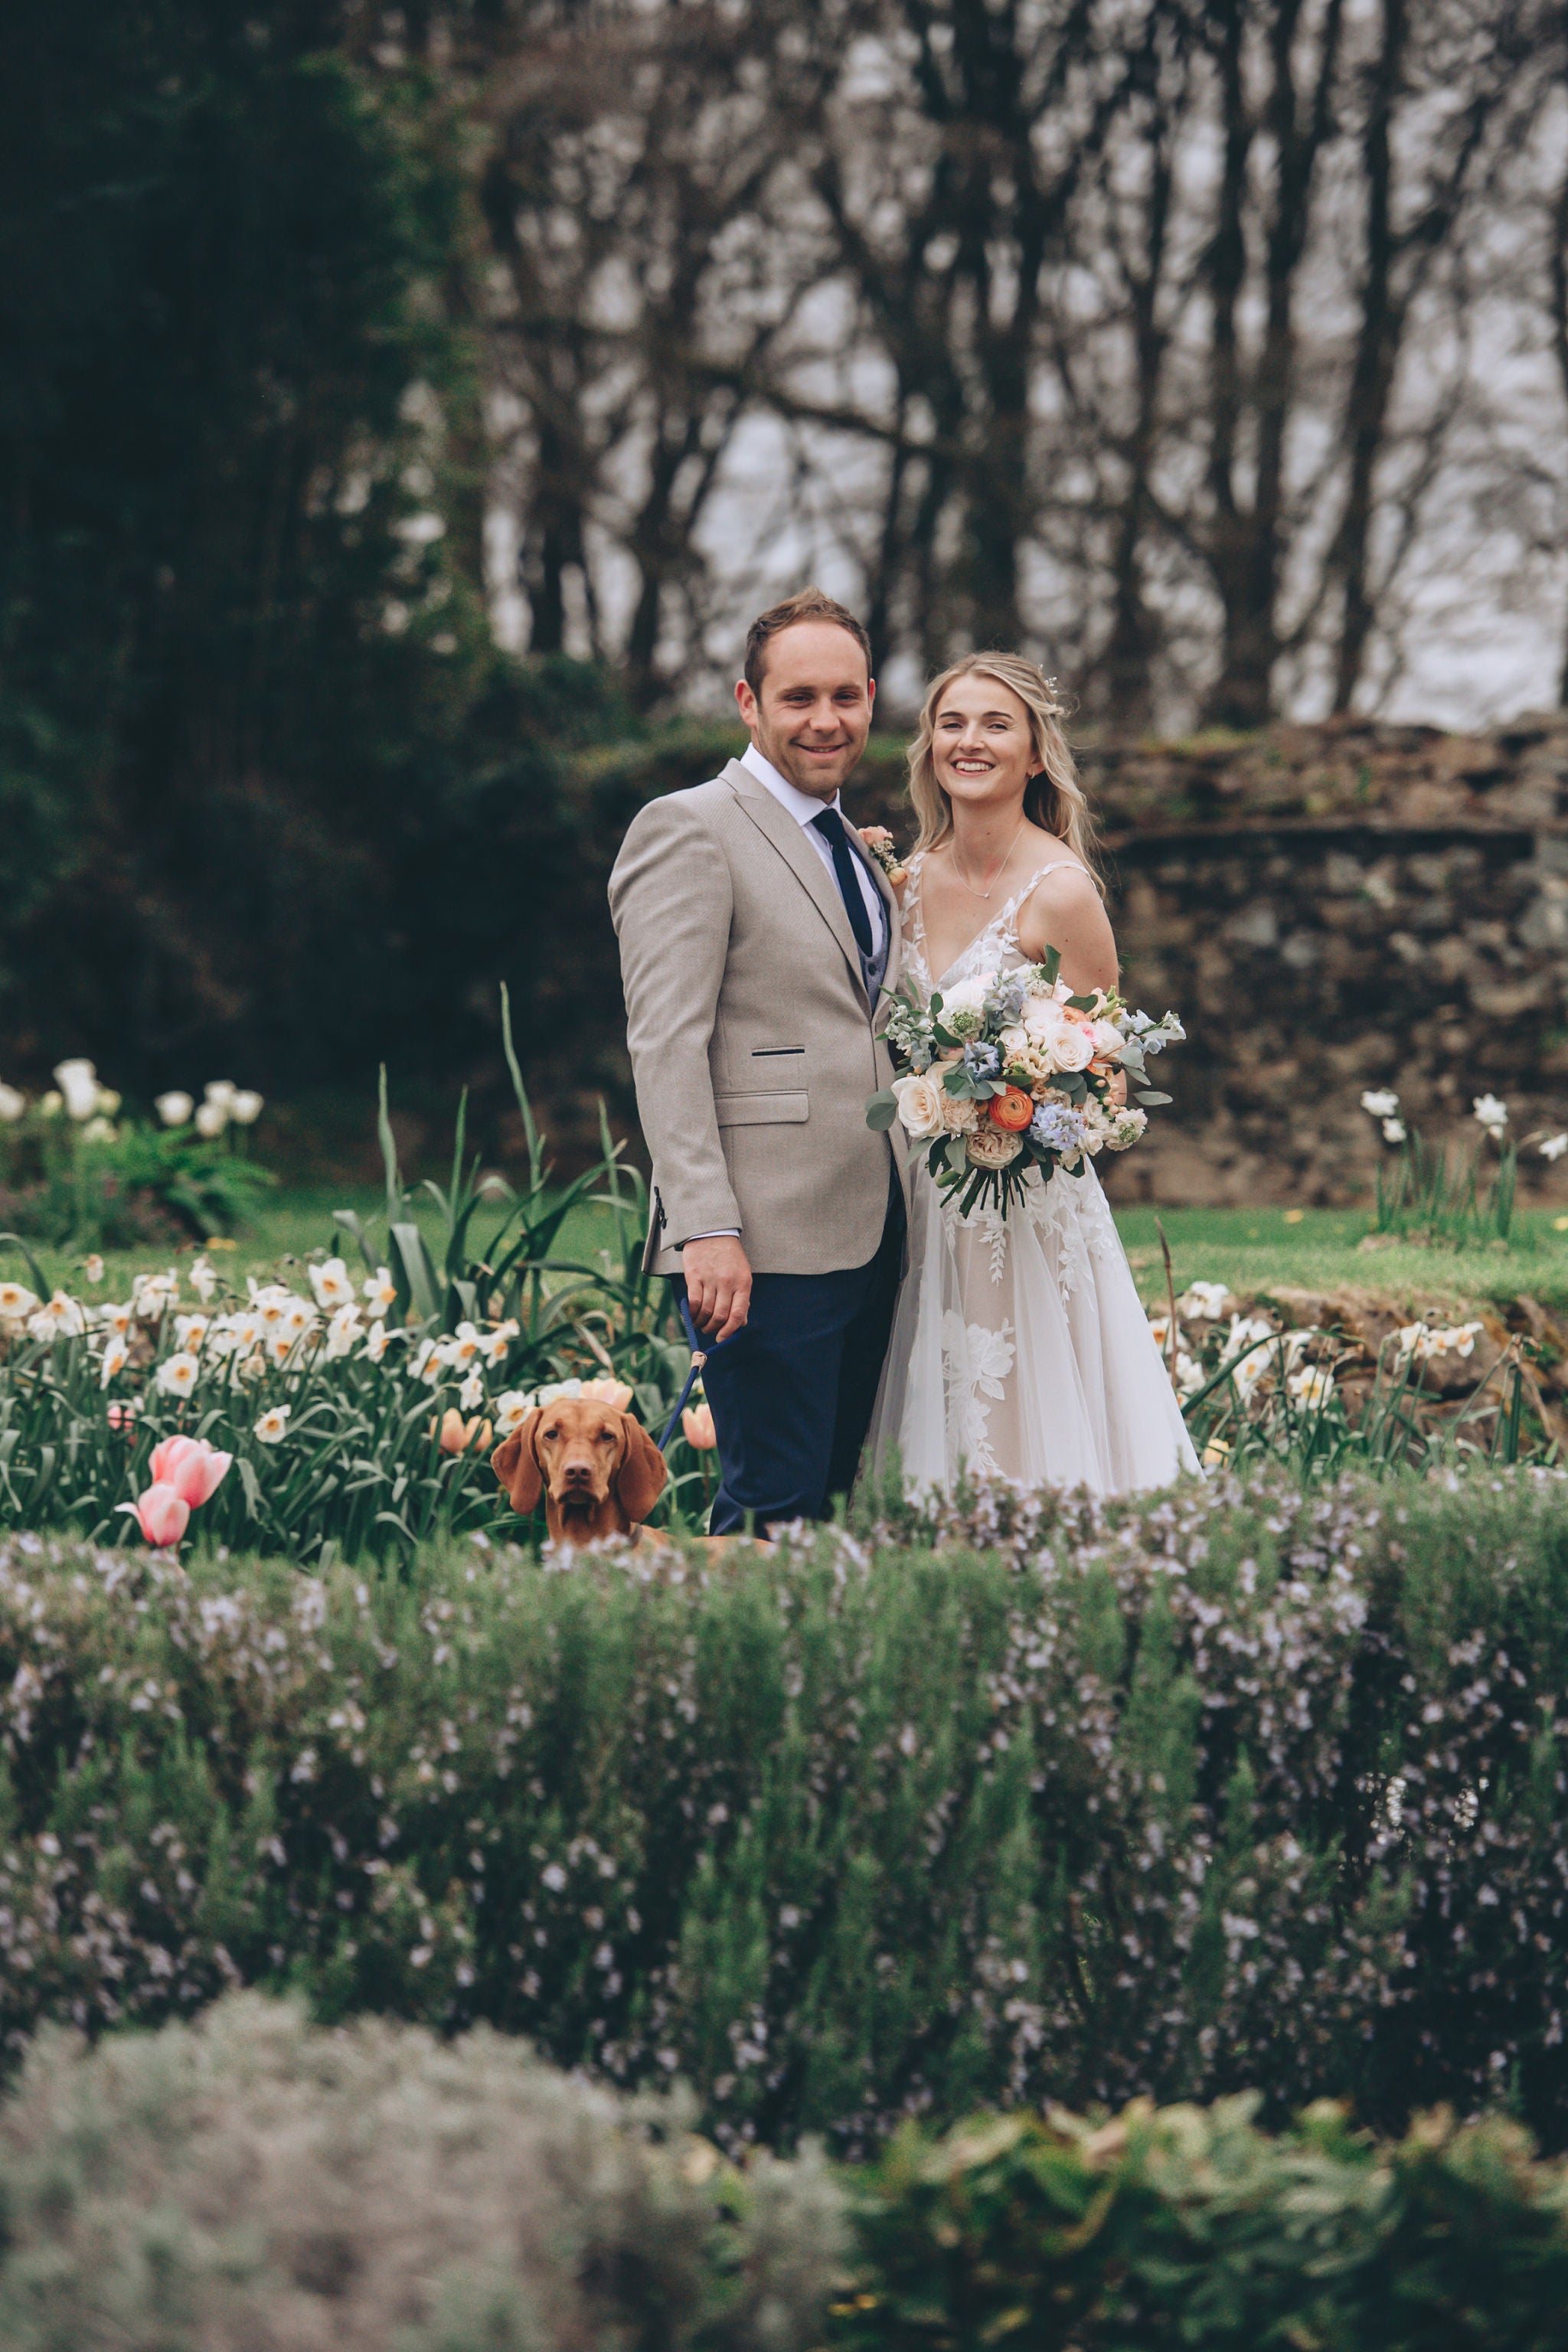 Excited dog with bride at Trevenna wedding barns